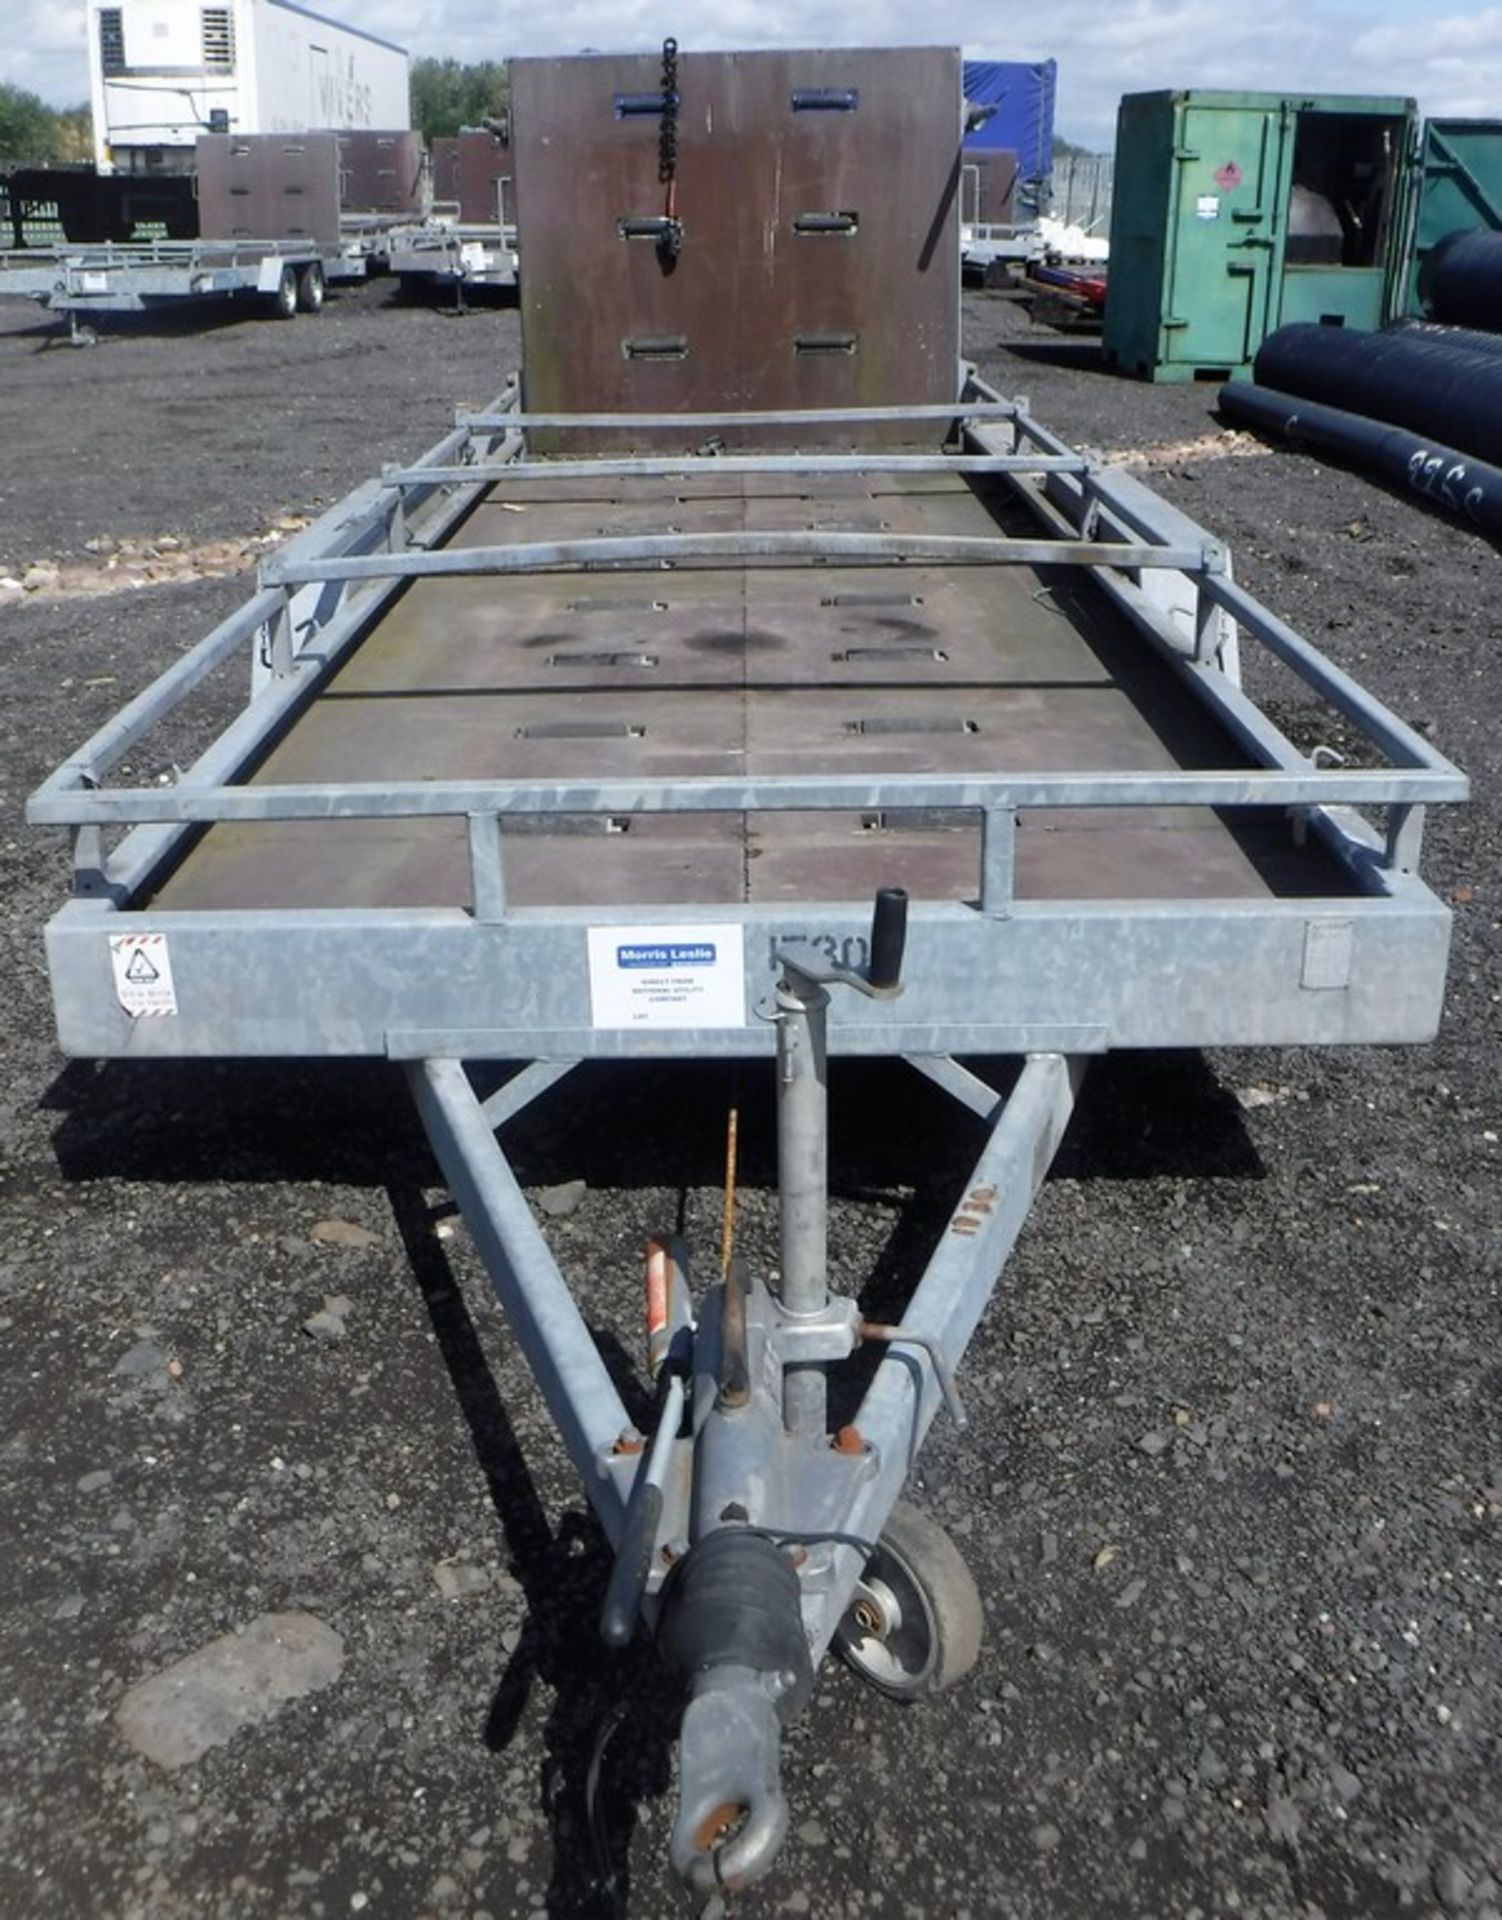 2003 WESTERN TRAILERS 18' x 6' twin axle trailer c/w 5' ramp. Max gross weight 2000kg VIN G50014/11. - Image 5 of 12